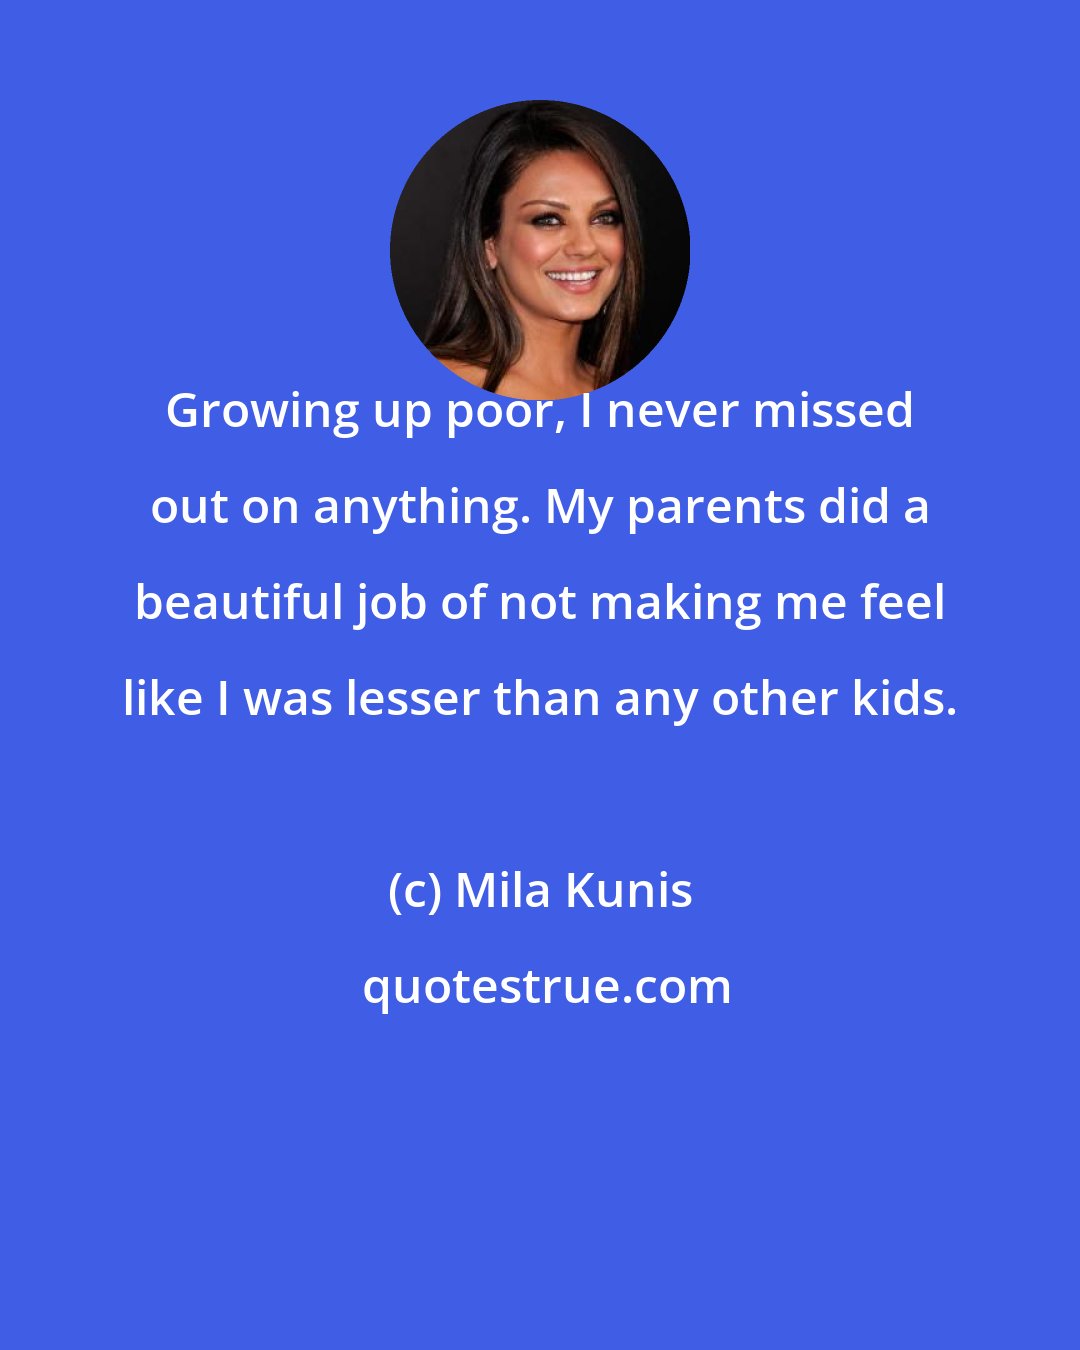 Mila Kunis: Growing up poor, I never missed out on anything. My parents did a beautiful job of not making me feel like I was lesser than any other kids.